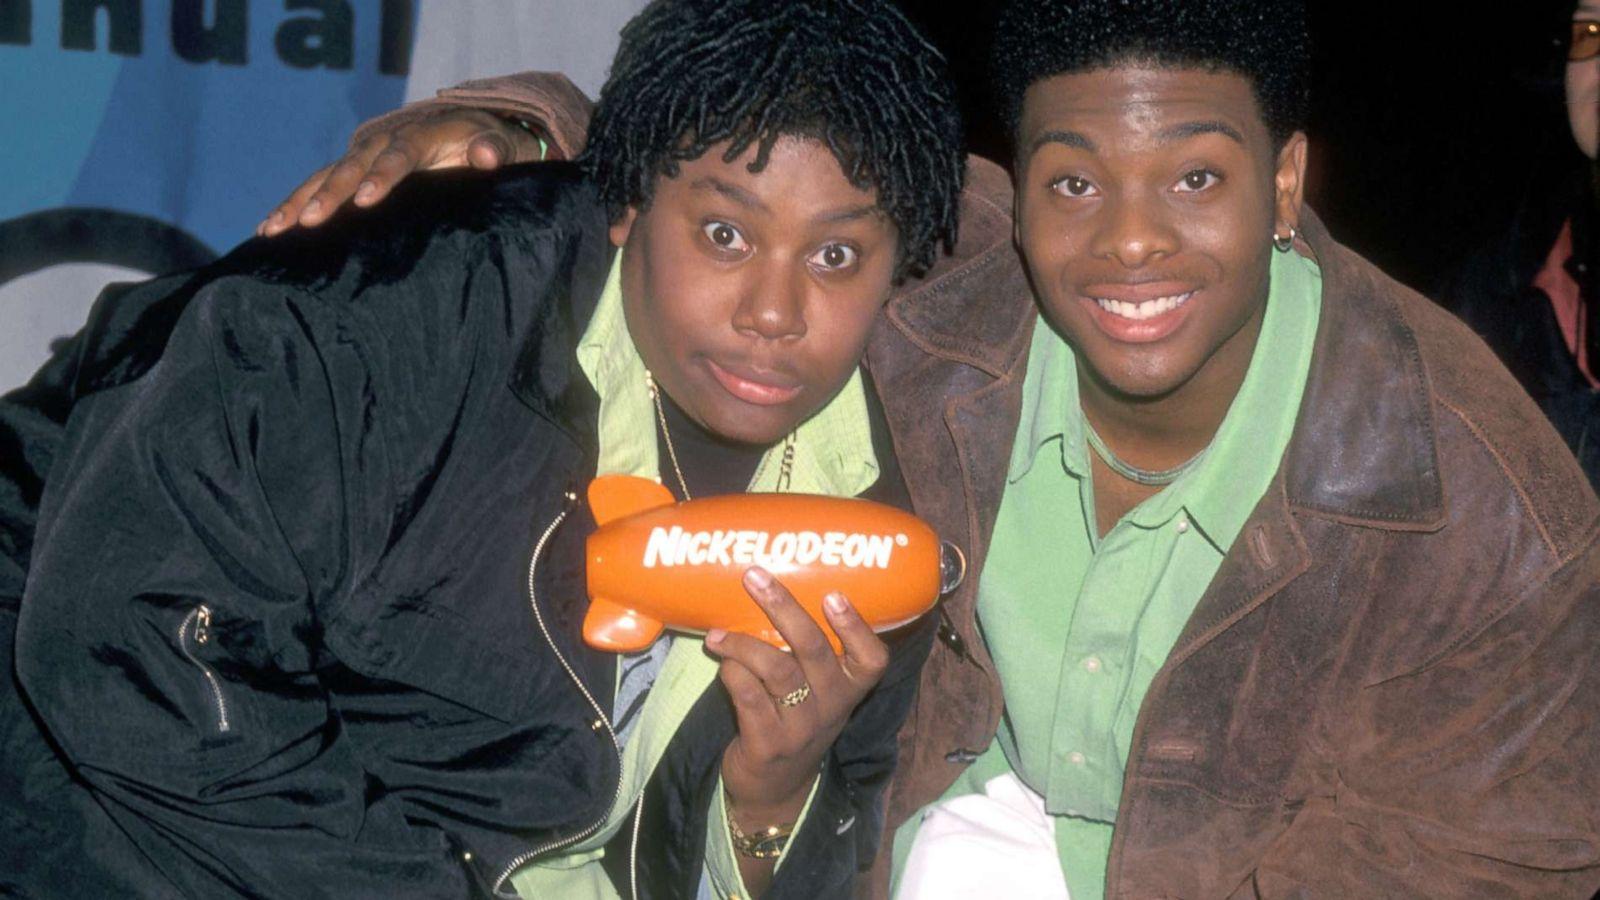 Nickelodeon announces 'All That' revival with Kenan Thompson